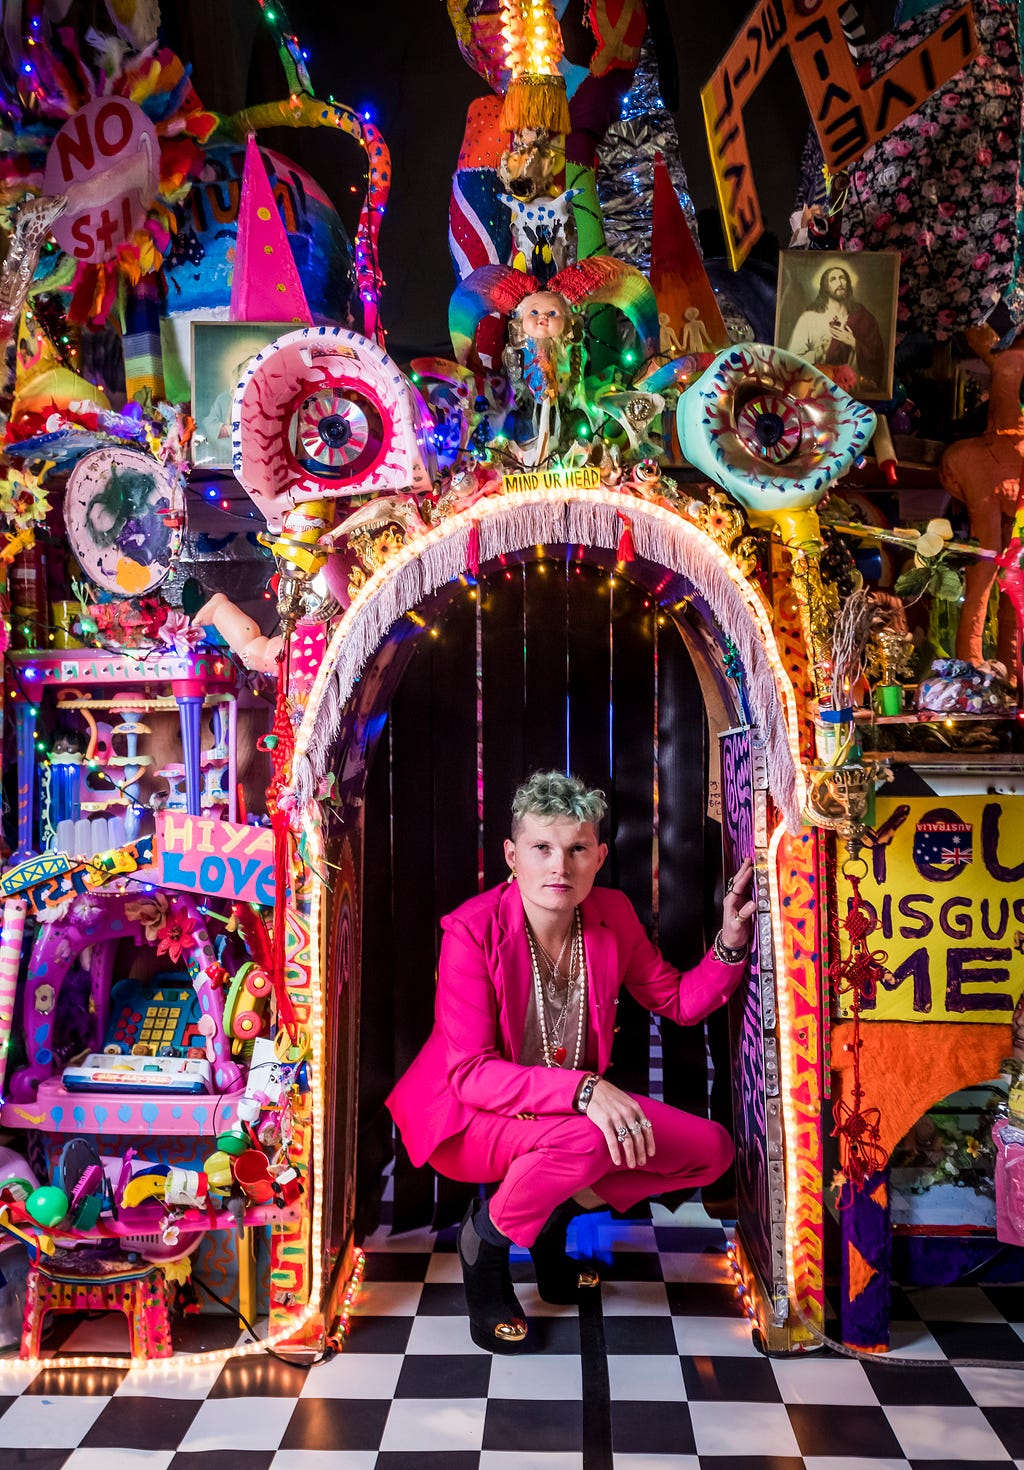 Paul Yore crouches in the archway of his installation ‘World made flesh’. Technicolor ephemera covers the walls, including hand painted posters with phrases such as ‘hiya love’ and ‘you disgust me’.